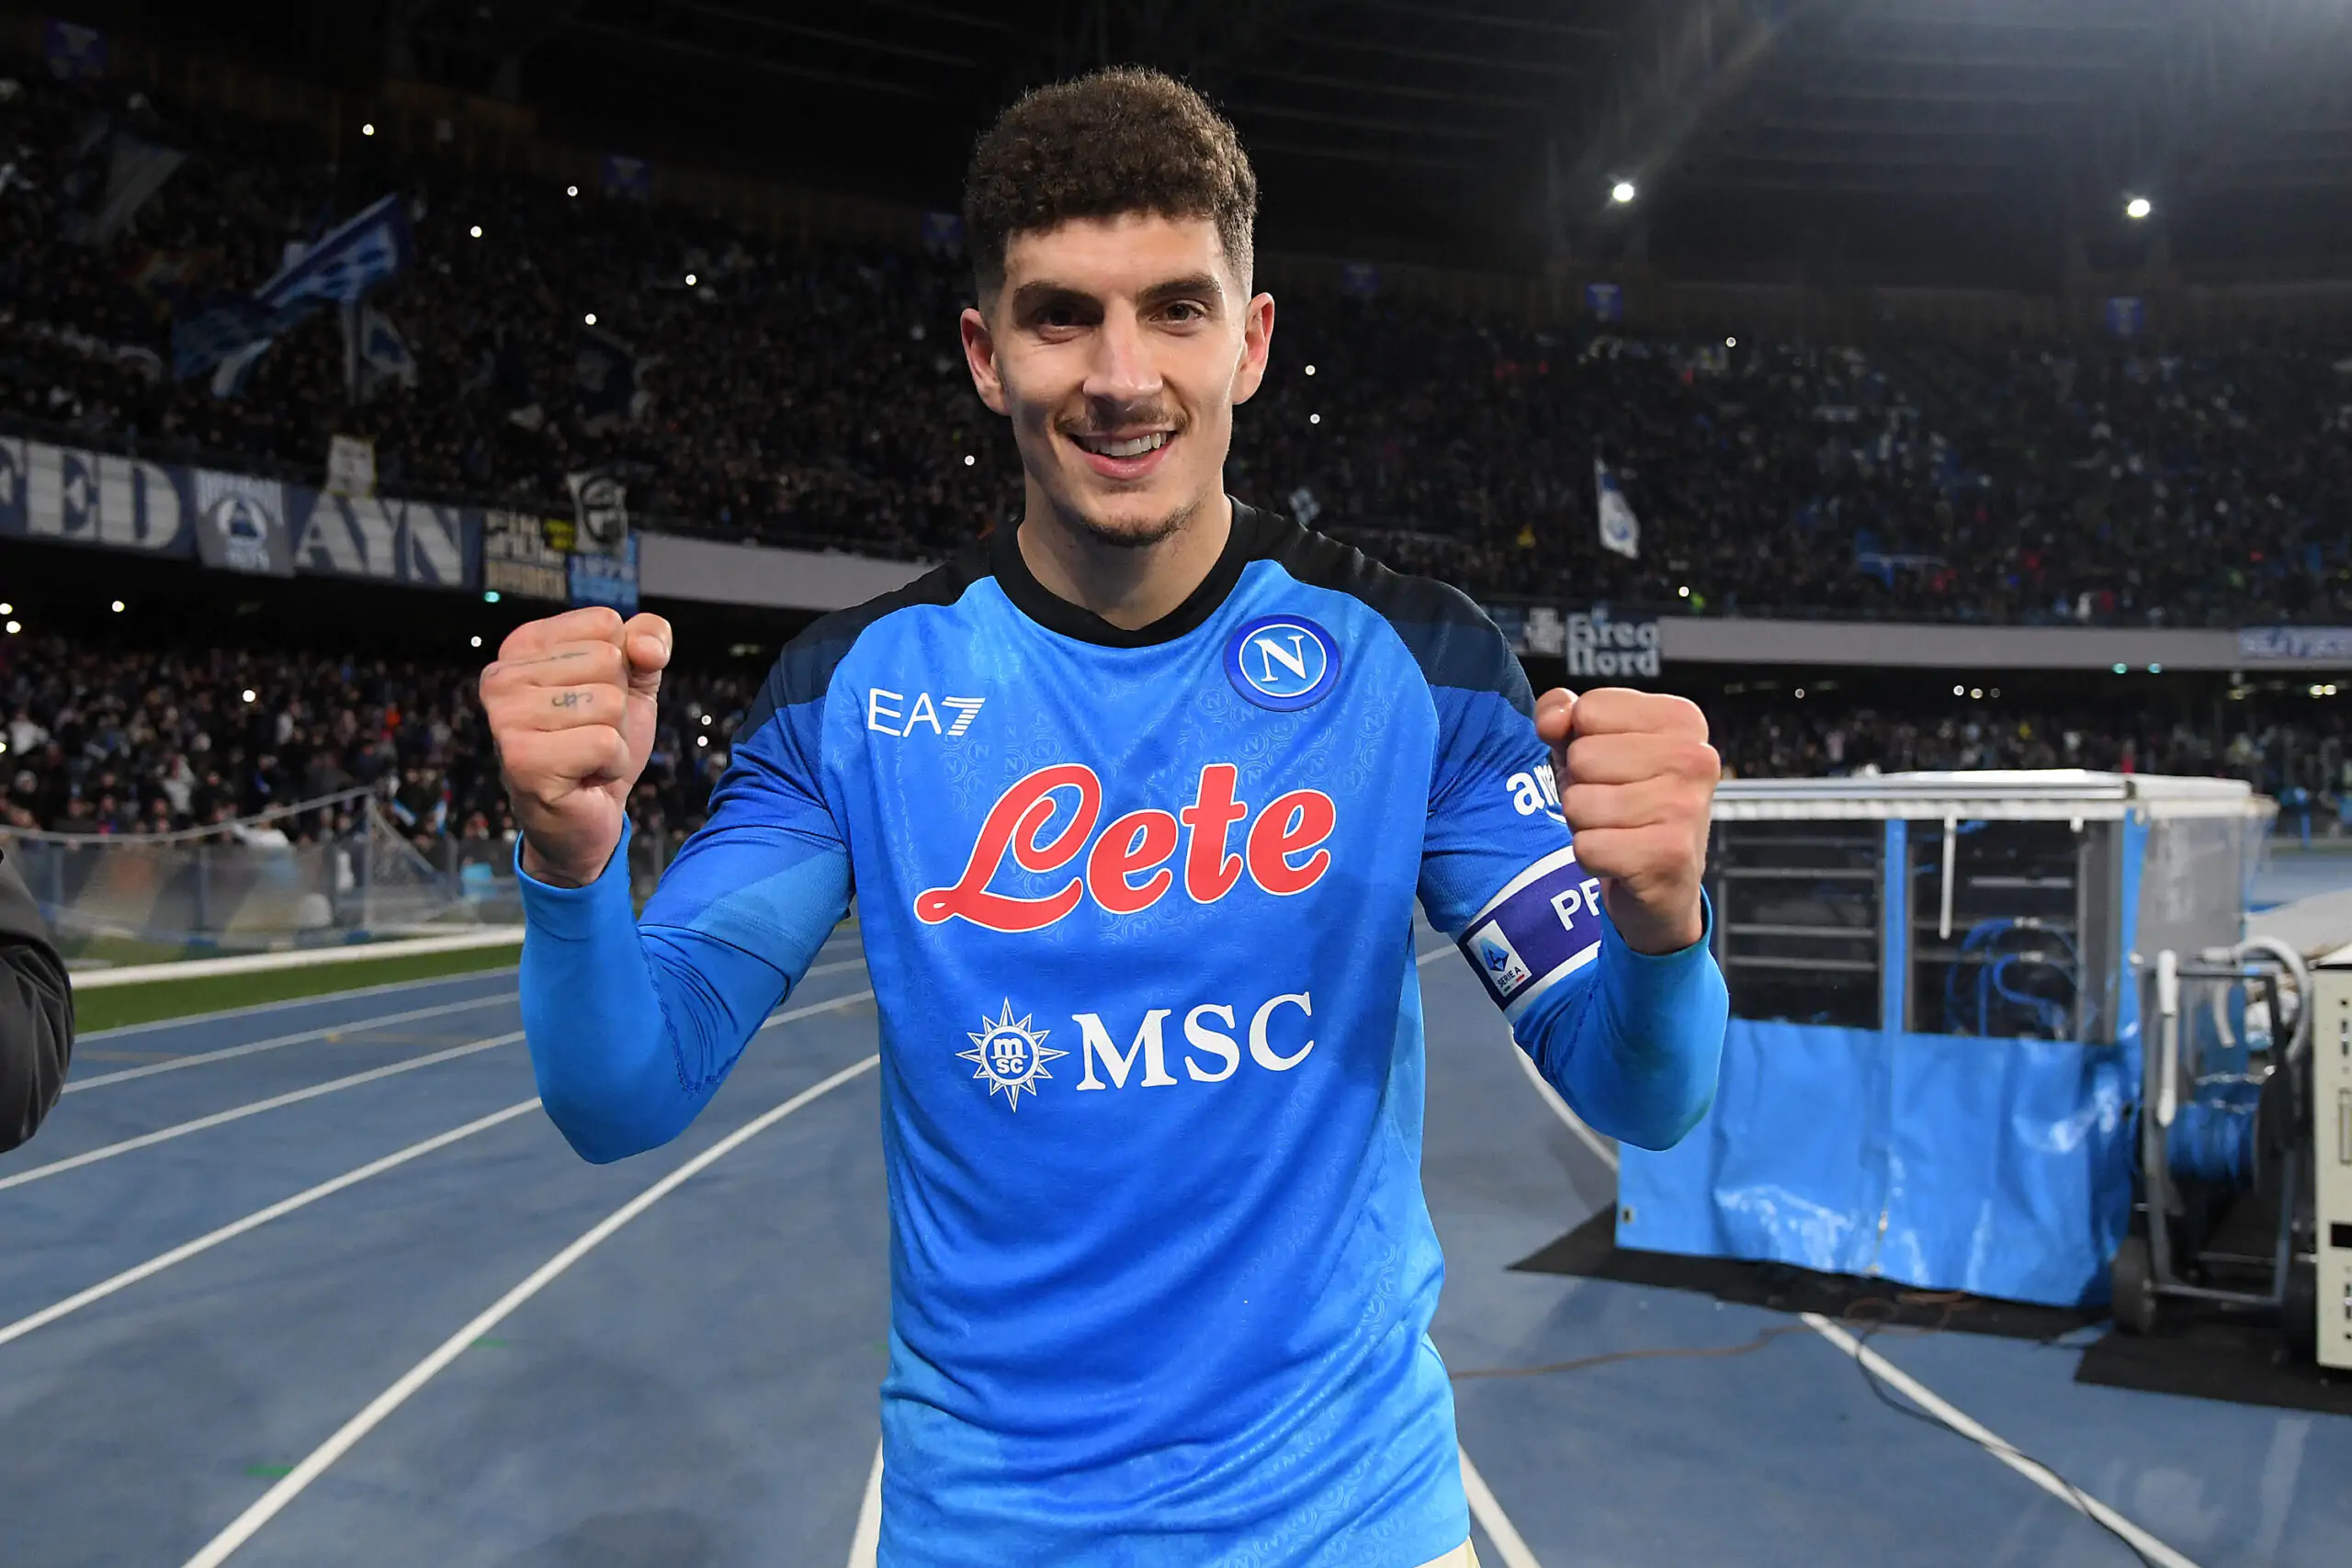 Giovanni Di Lorenzo seemed poised to end his career with Napoli, but he’s considering leaving, with Manchester United and Aston Villa on trail.